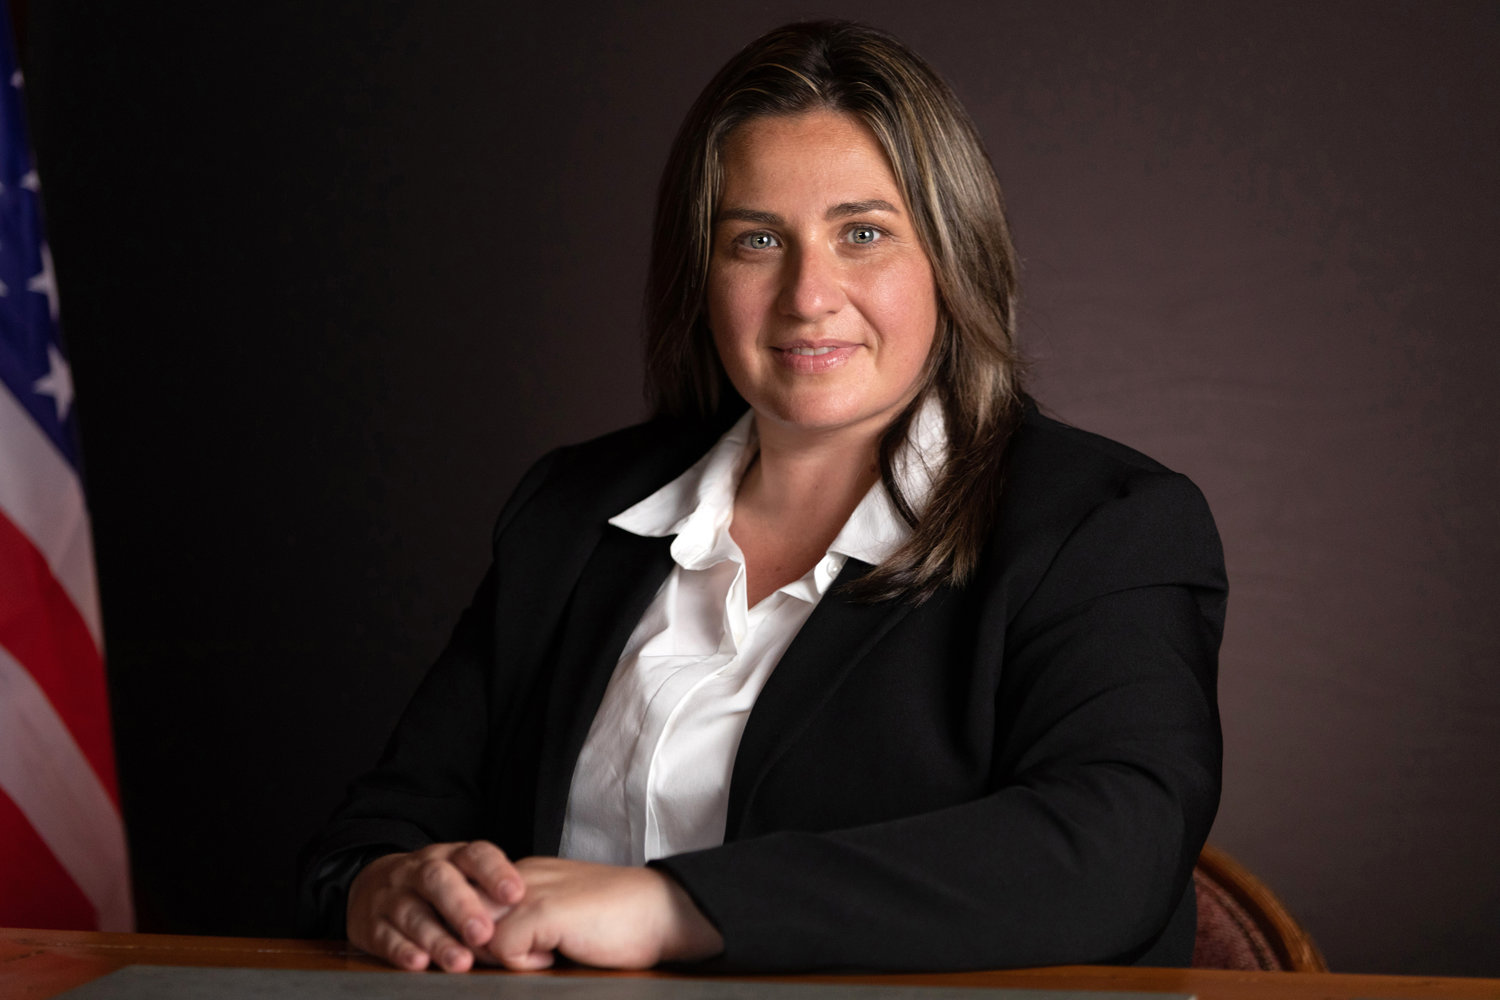 Meagan Galligan is the new Sullivan County District Attorney.